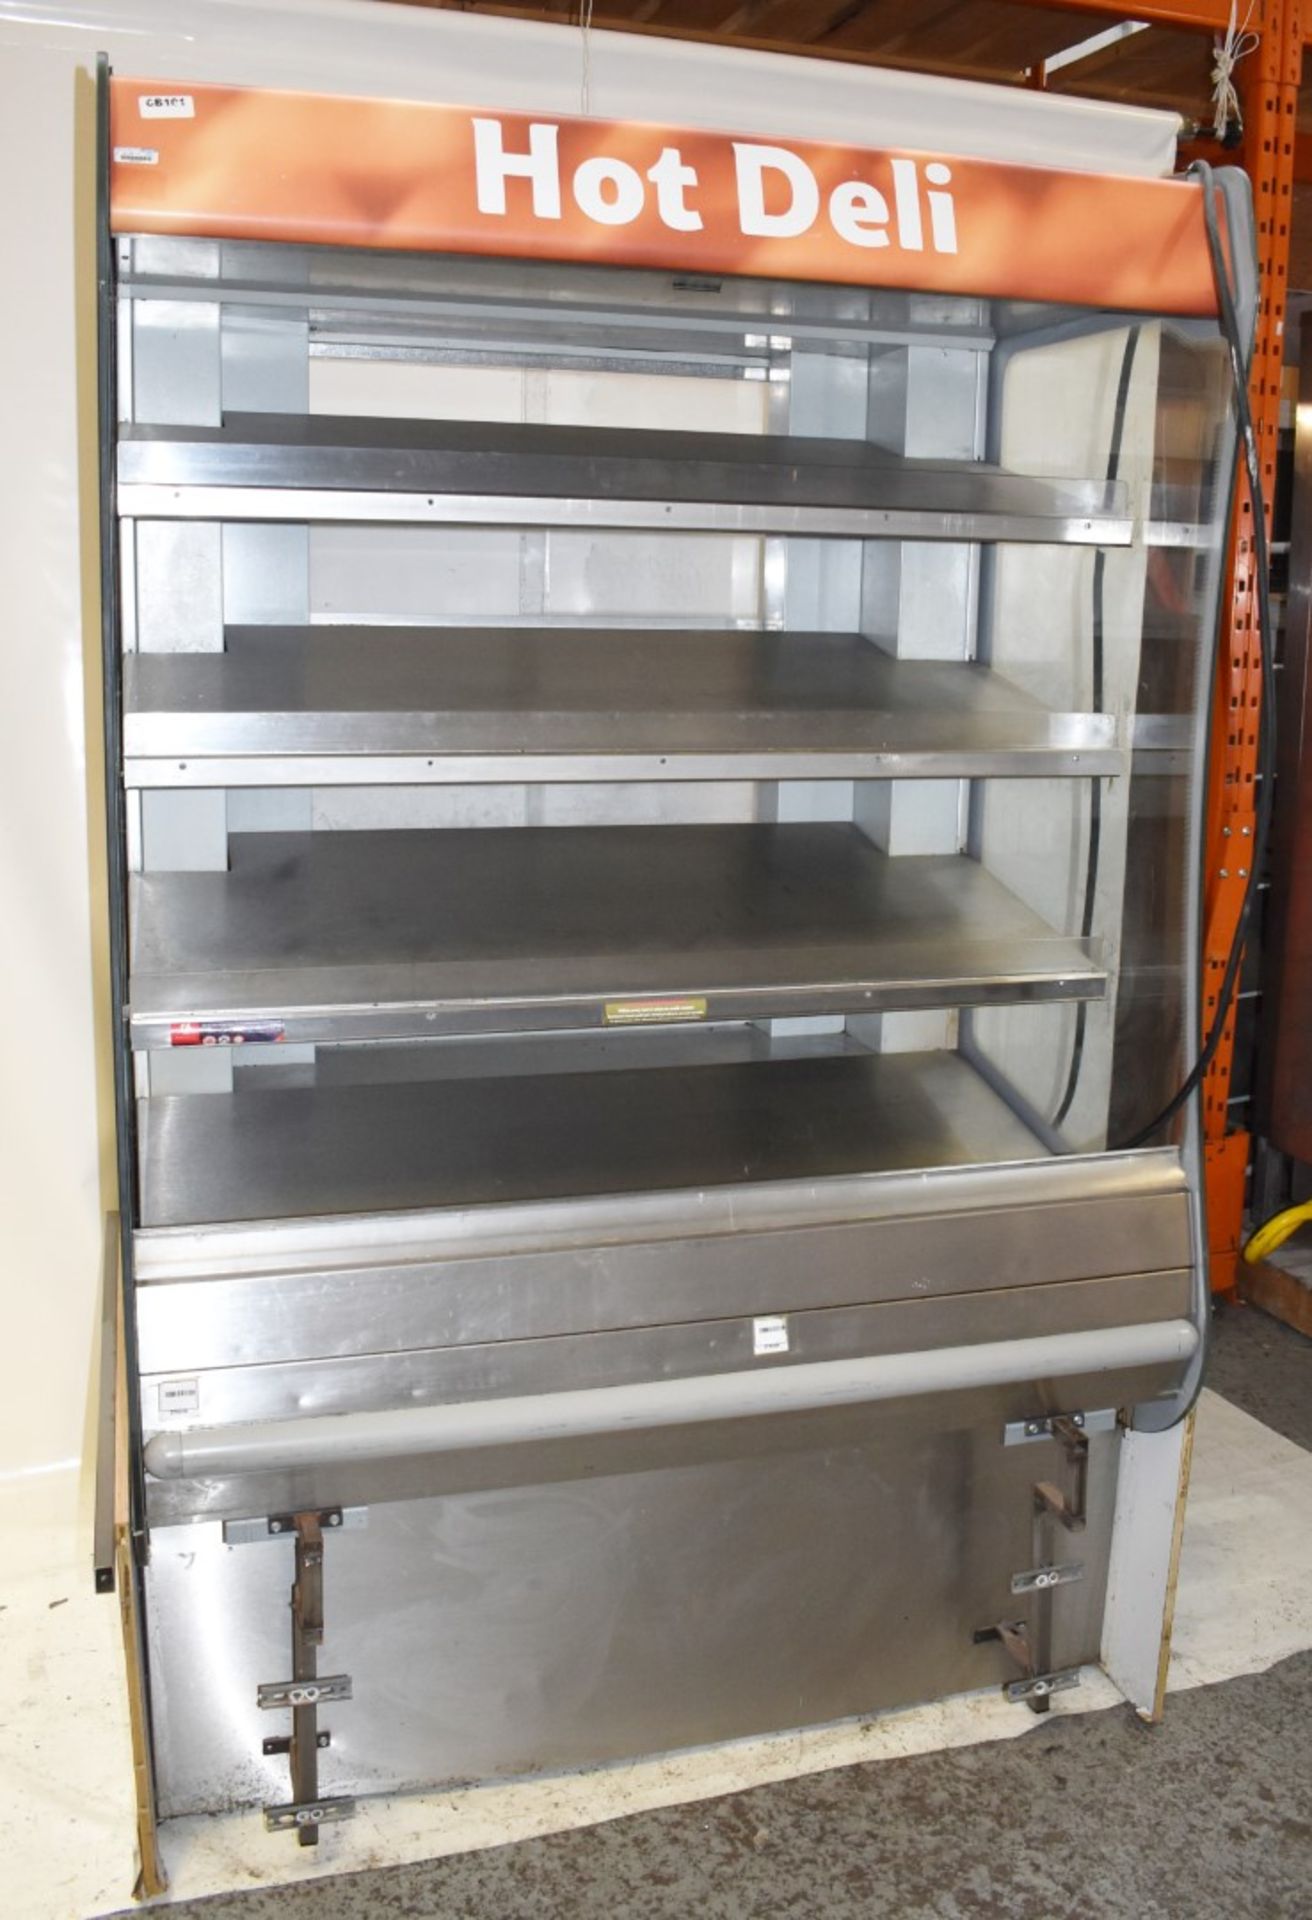 1 x BBQ King BKI MHC4 Hot Multi-tier Display Case/Heated Merchandiser Display Unit With Rear - Image 8 of 10